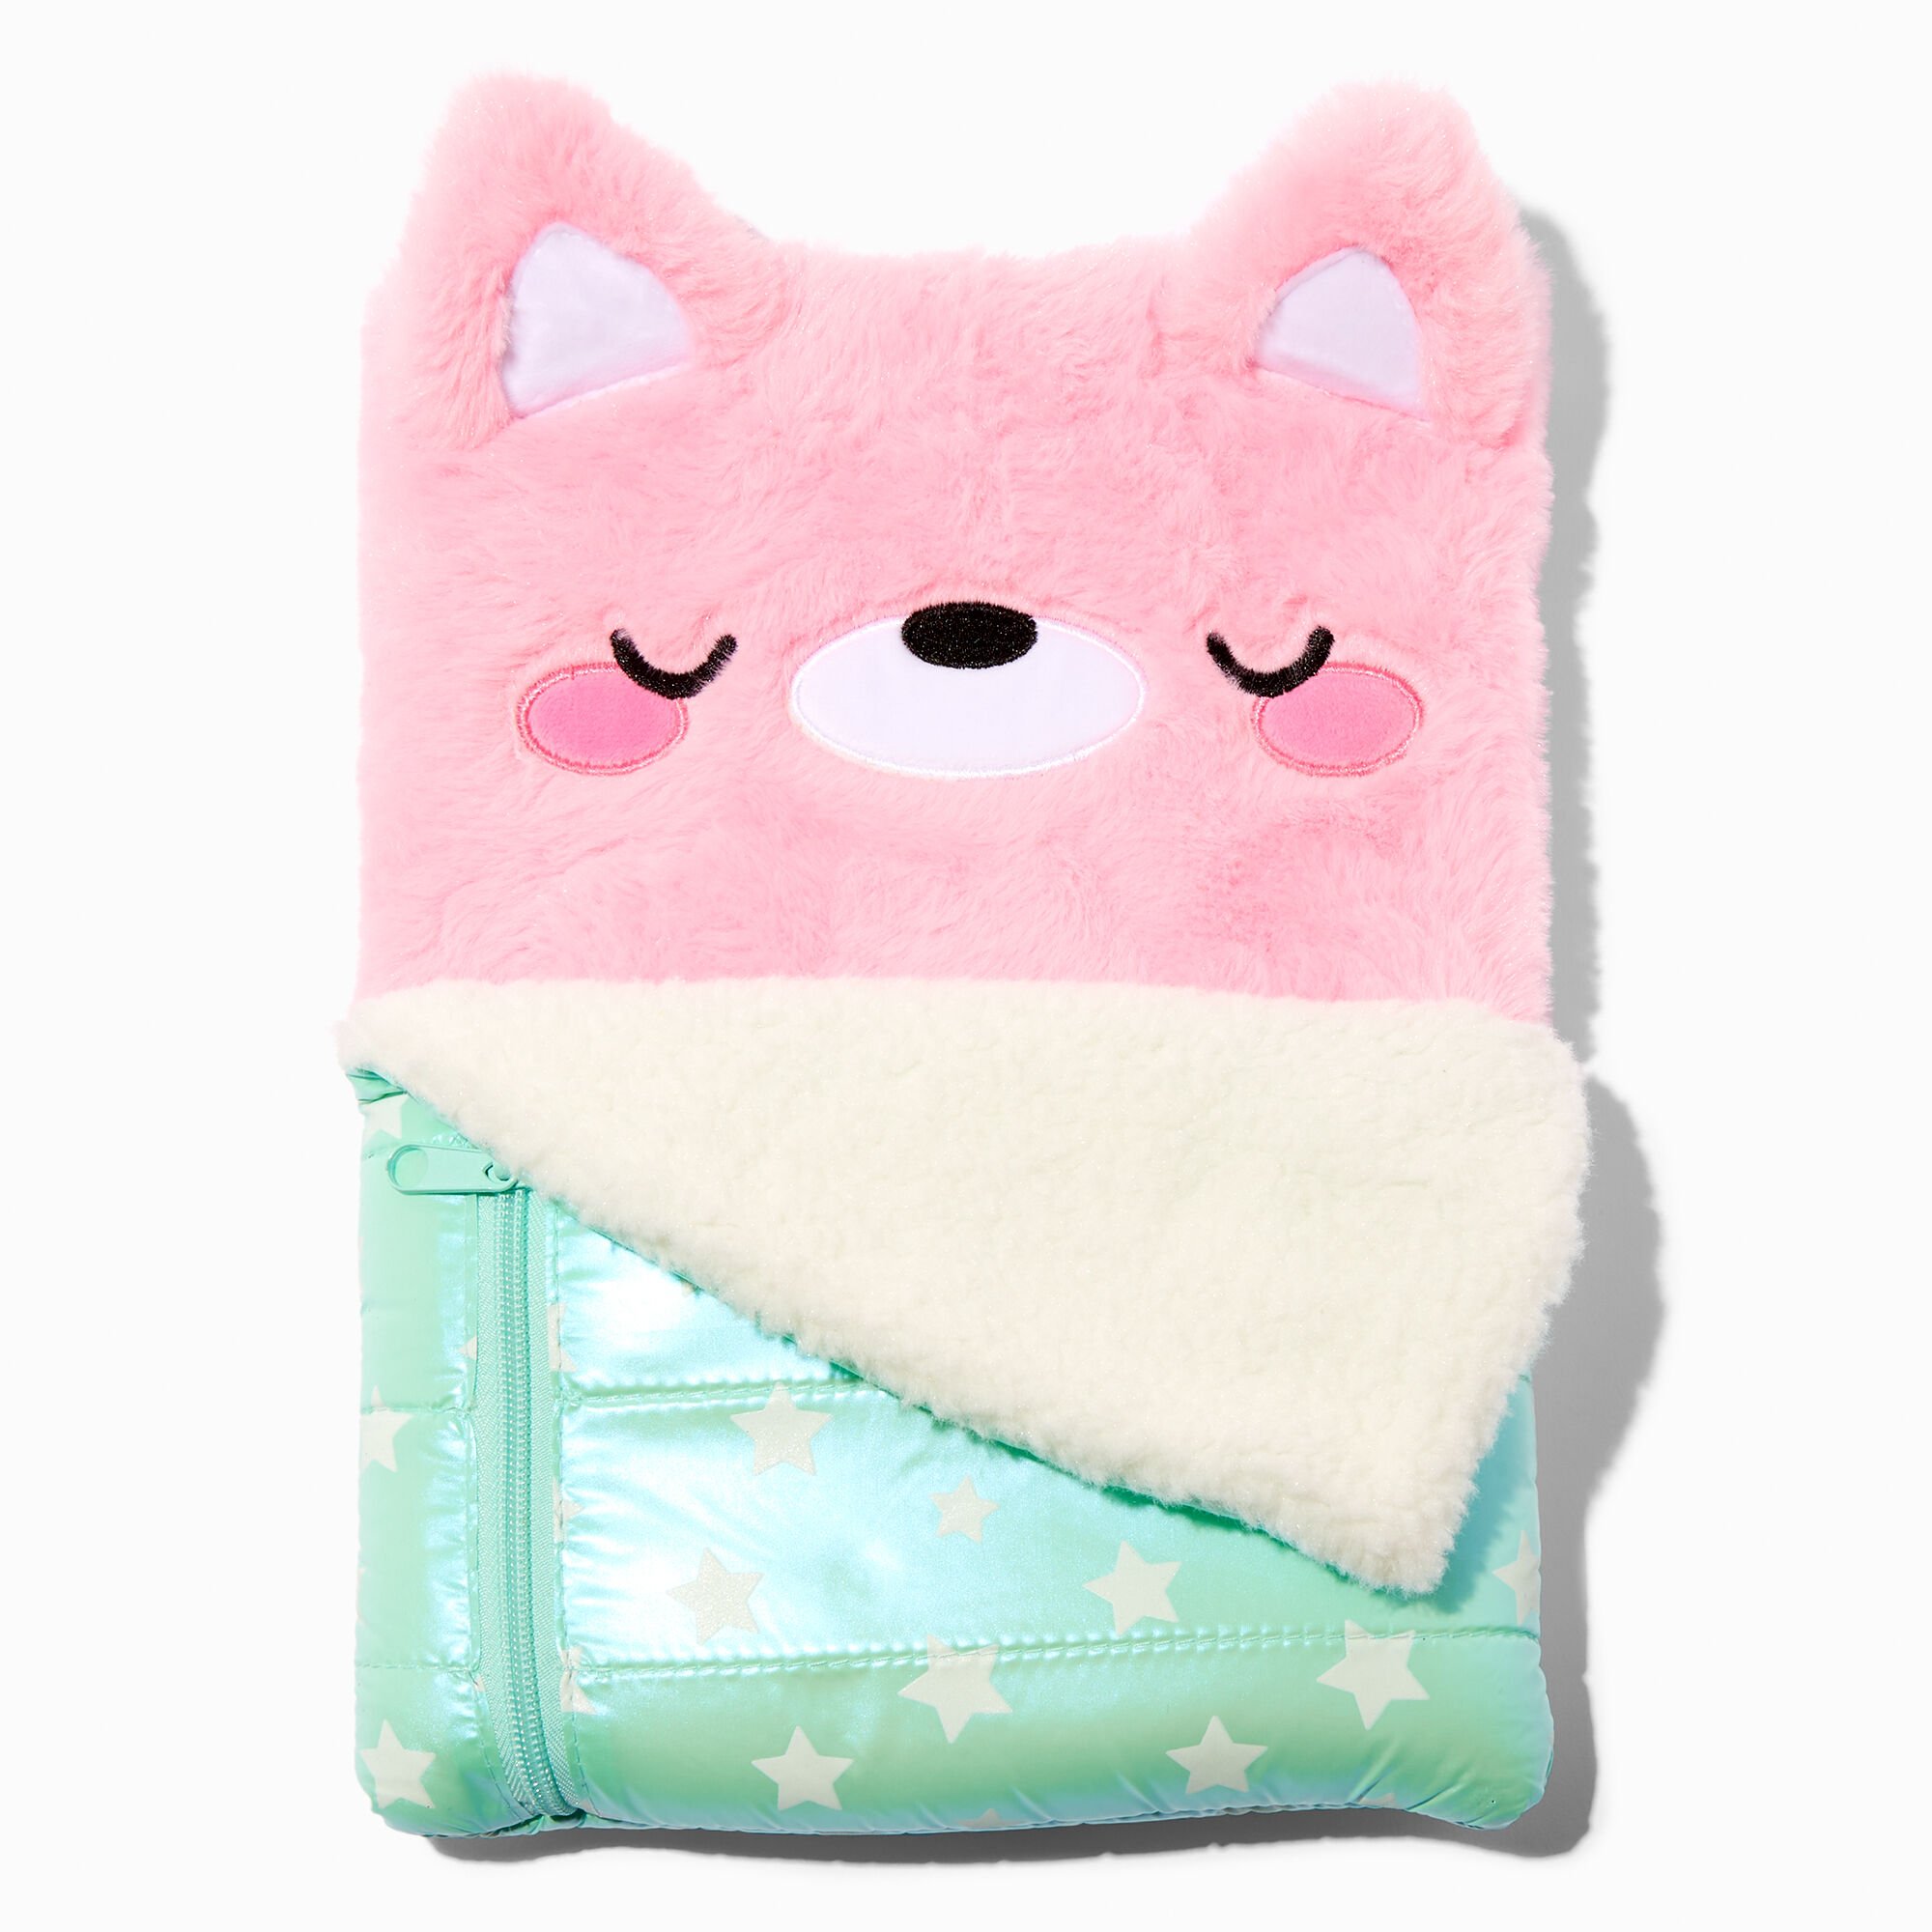 View Claires Sleepy Cat Plush Sketchbook Pink information